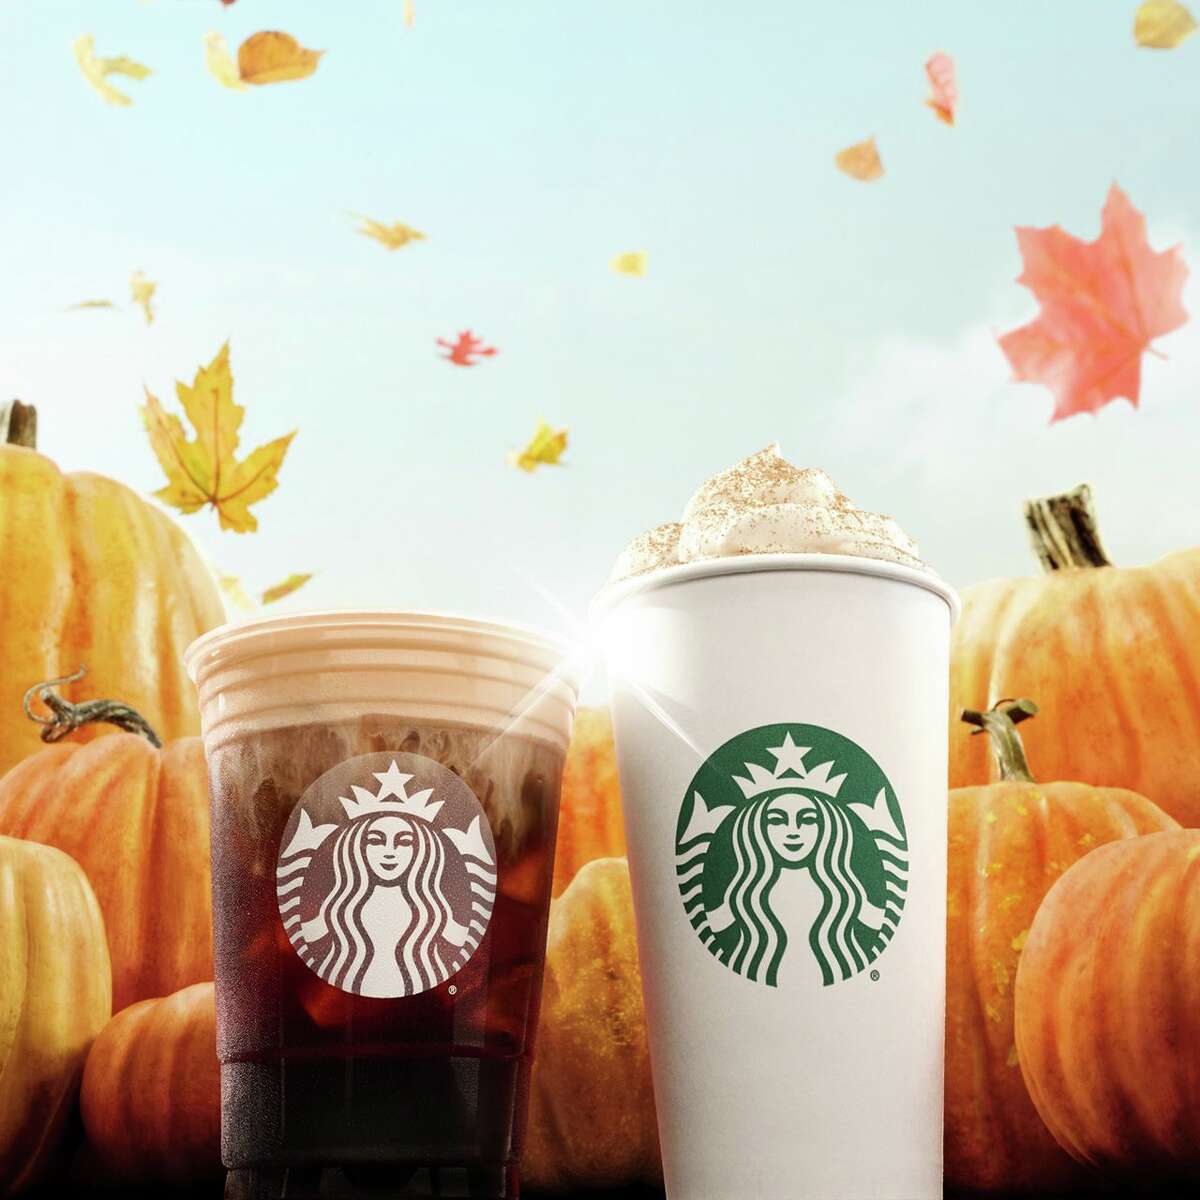 Starbucks' pumpkin spice beverages and baked goods return to stores Aug. 30, 2022.